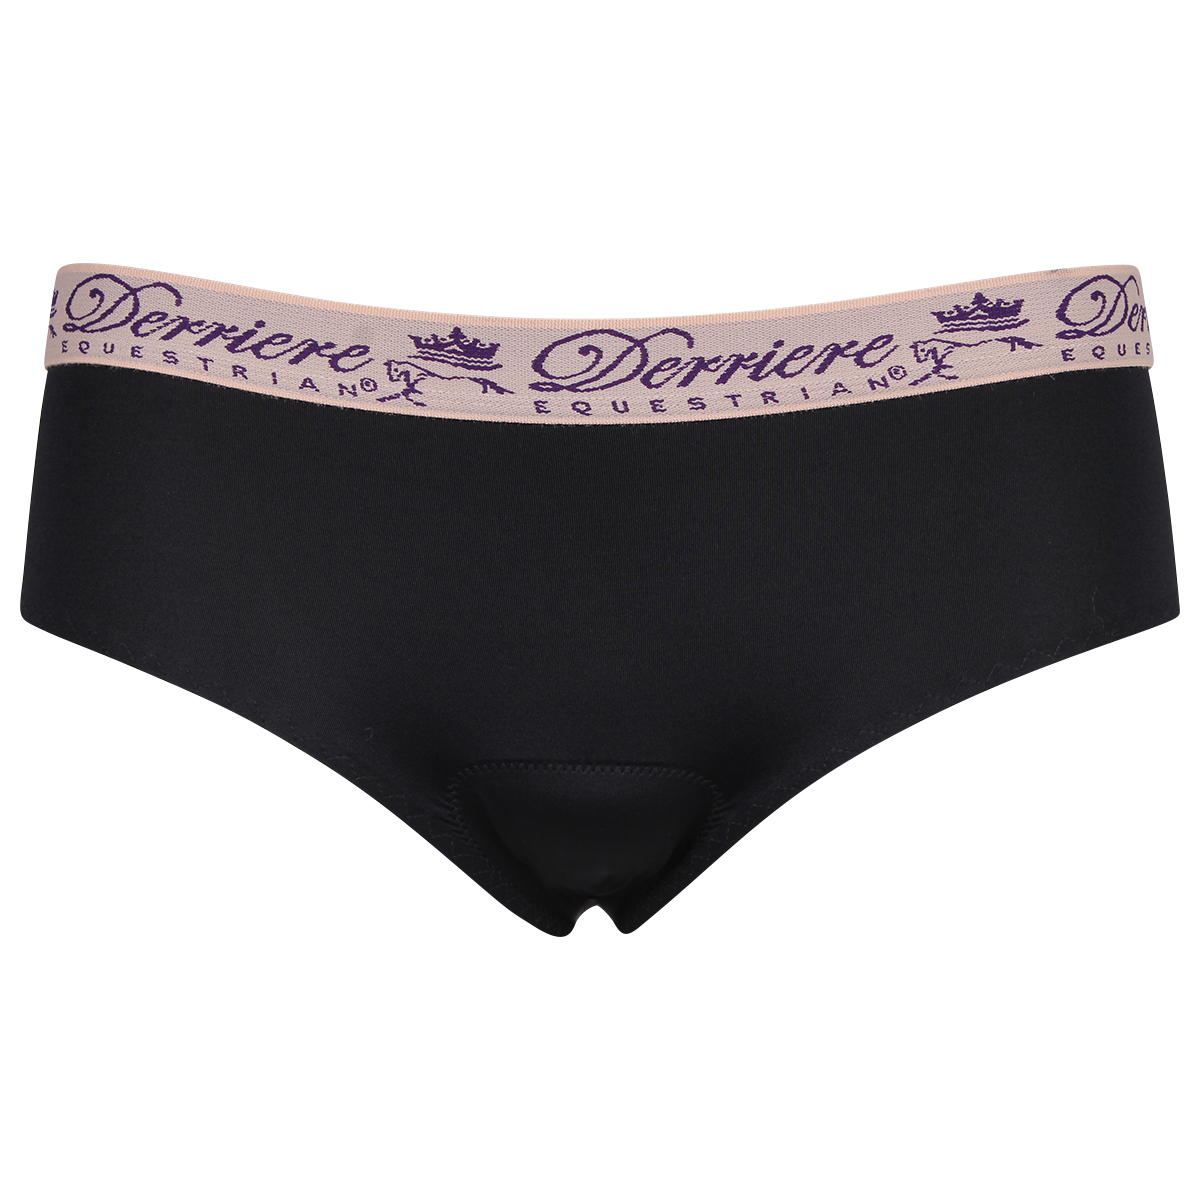 Performance Panty Derriere Equestrian Padded, S in zwart